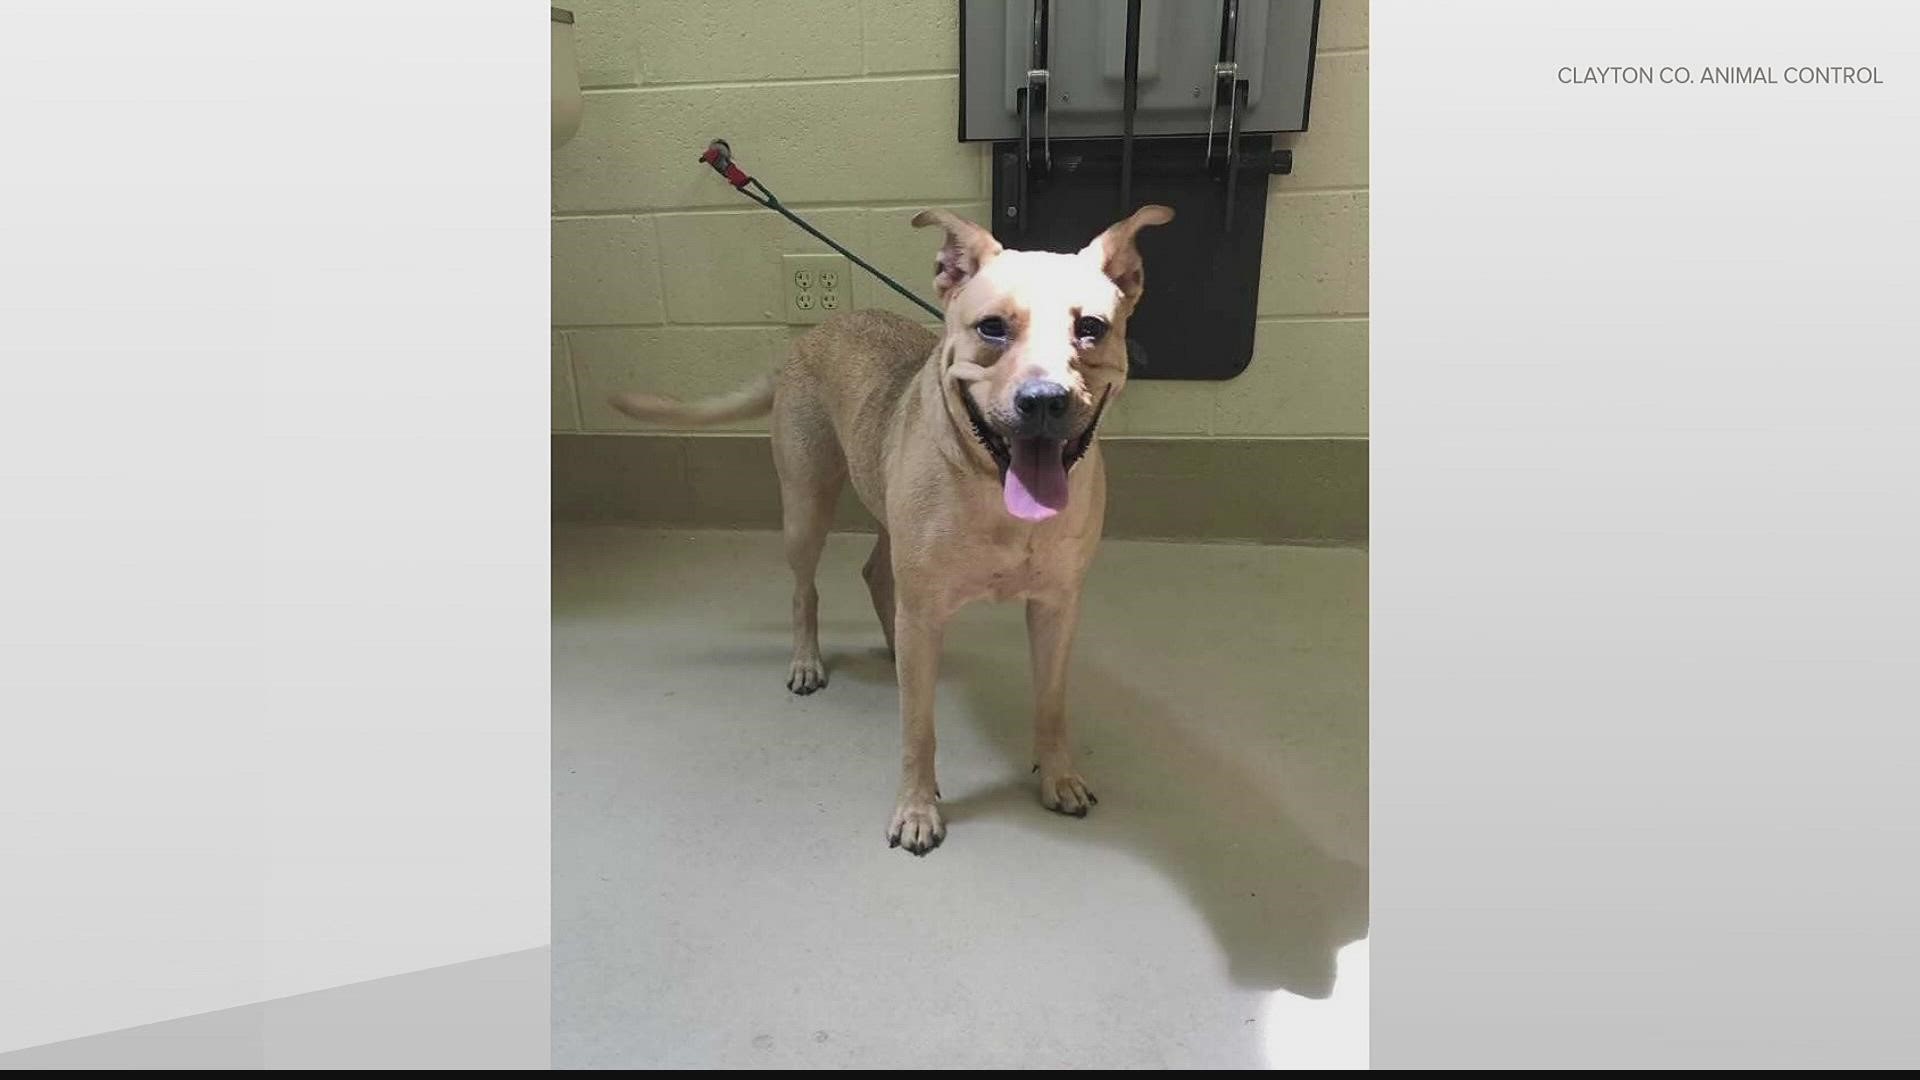 There are 20 dogs in Clayton County that are in urgent need of adoption or rescue, according to their animal control center.